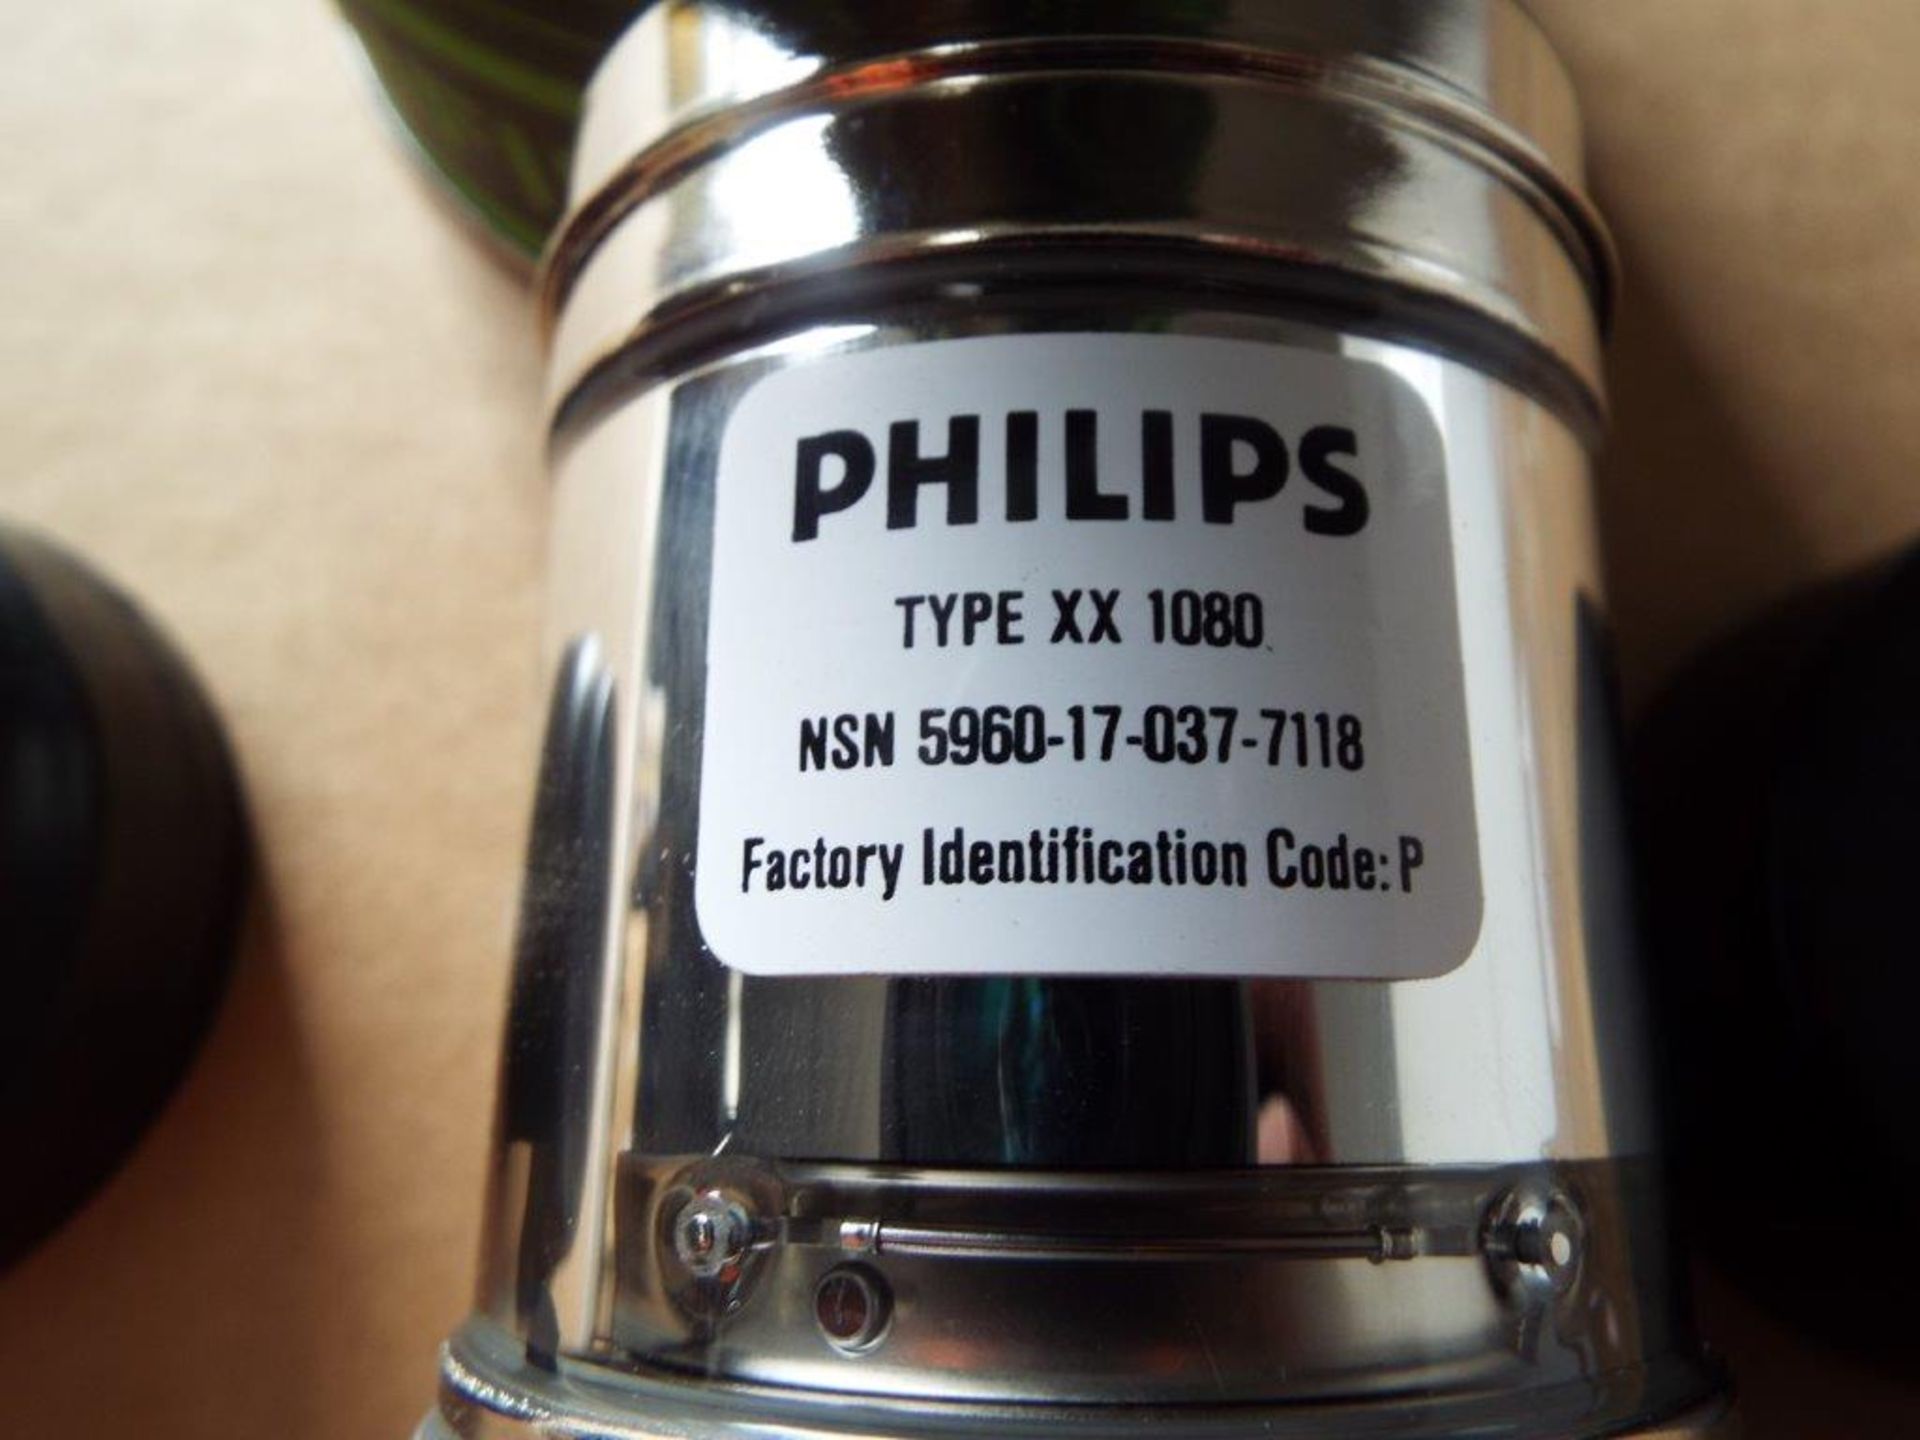 5 x Philips Type XX 1080 Image Intensifier / Night Vision Tubes - Image 4 of 7